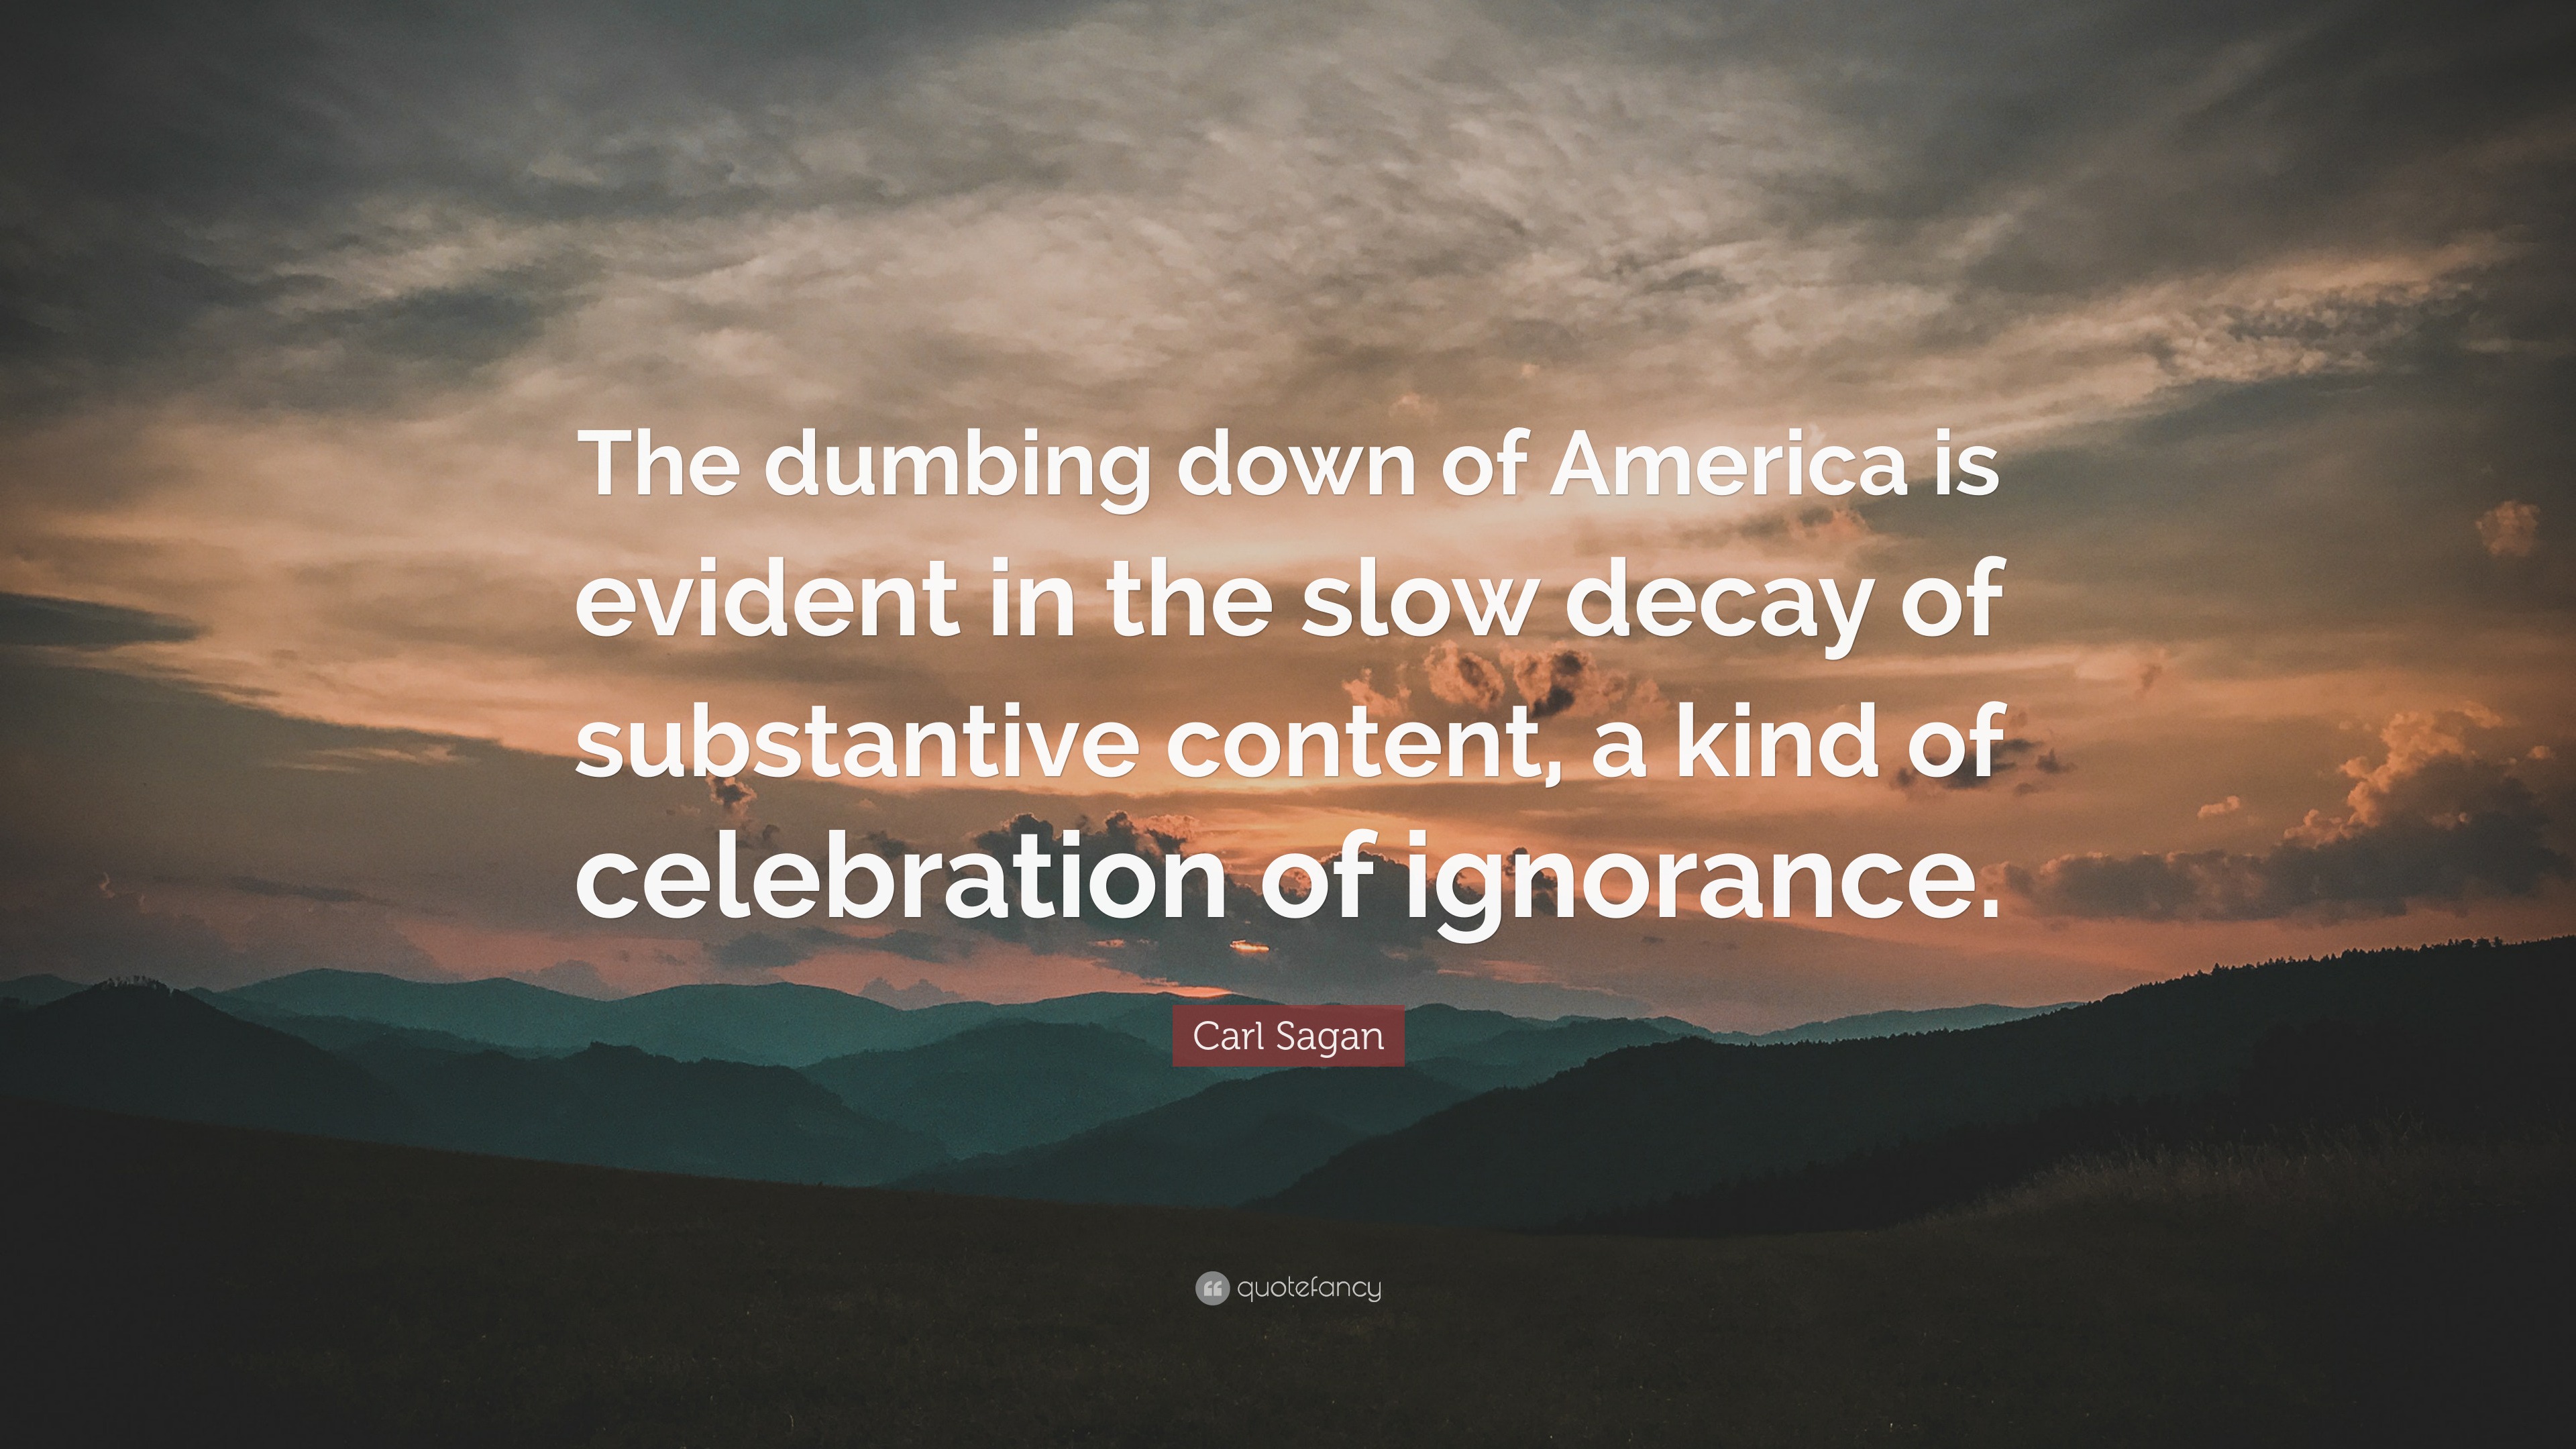 Carl Sagan Quote: “The dumbing down of America is evident in the slow